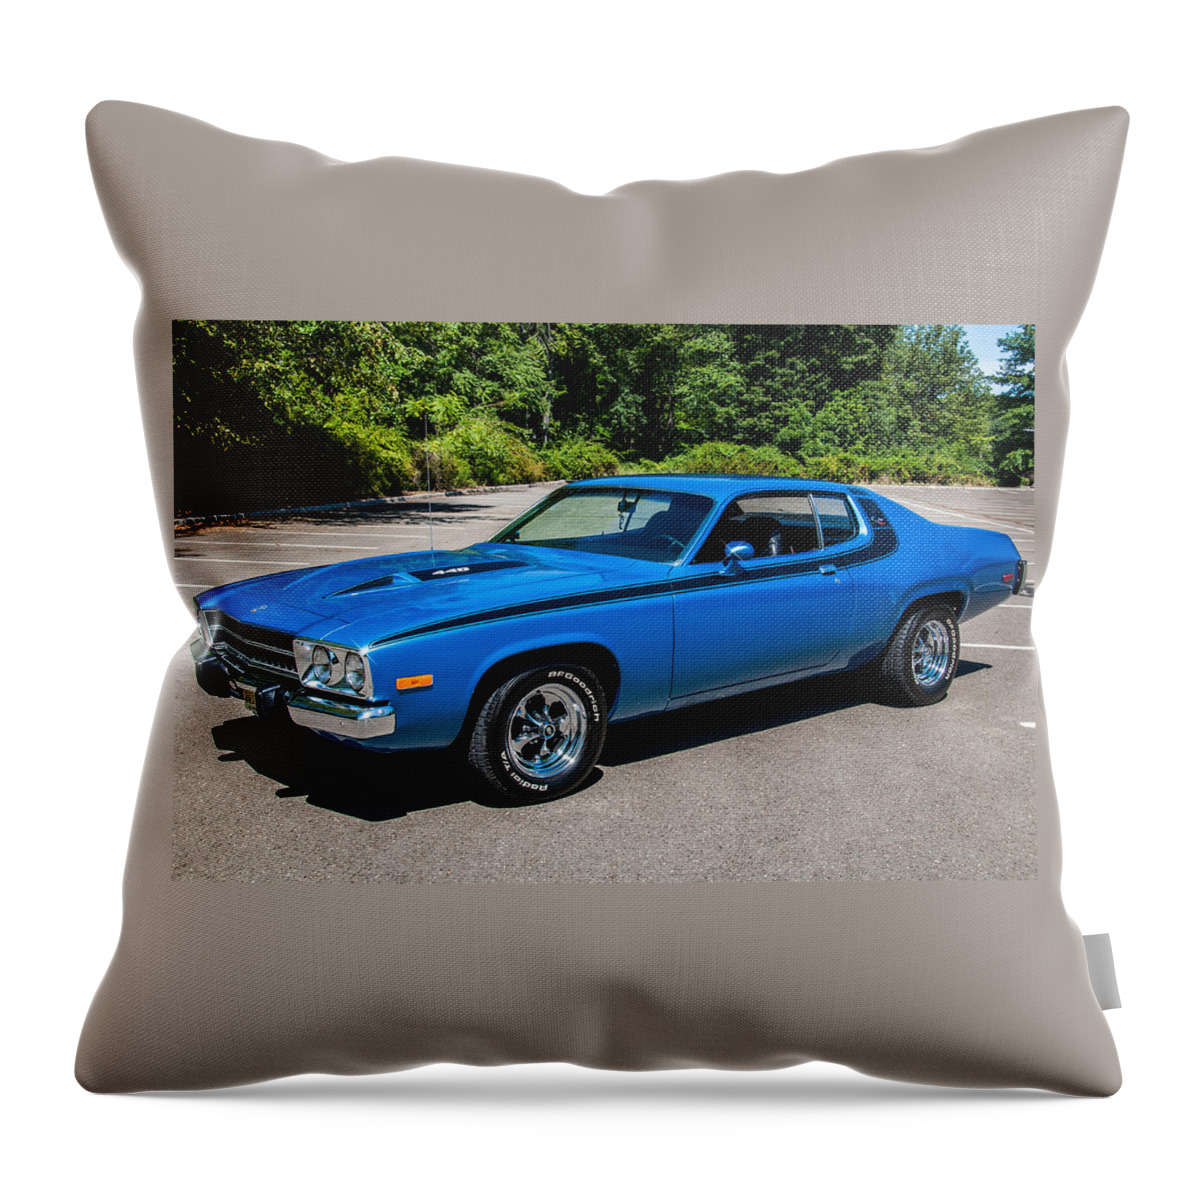 Roadrunner Throw Pillow featuring the photograph 73 Roadrunner 440 by Anthony Sacco